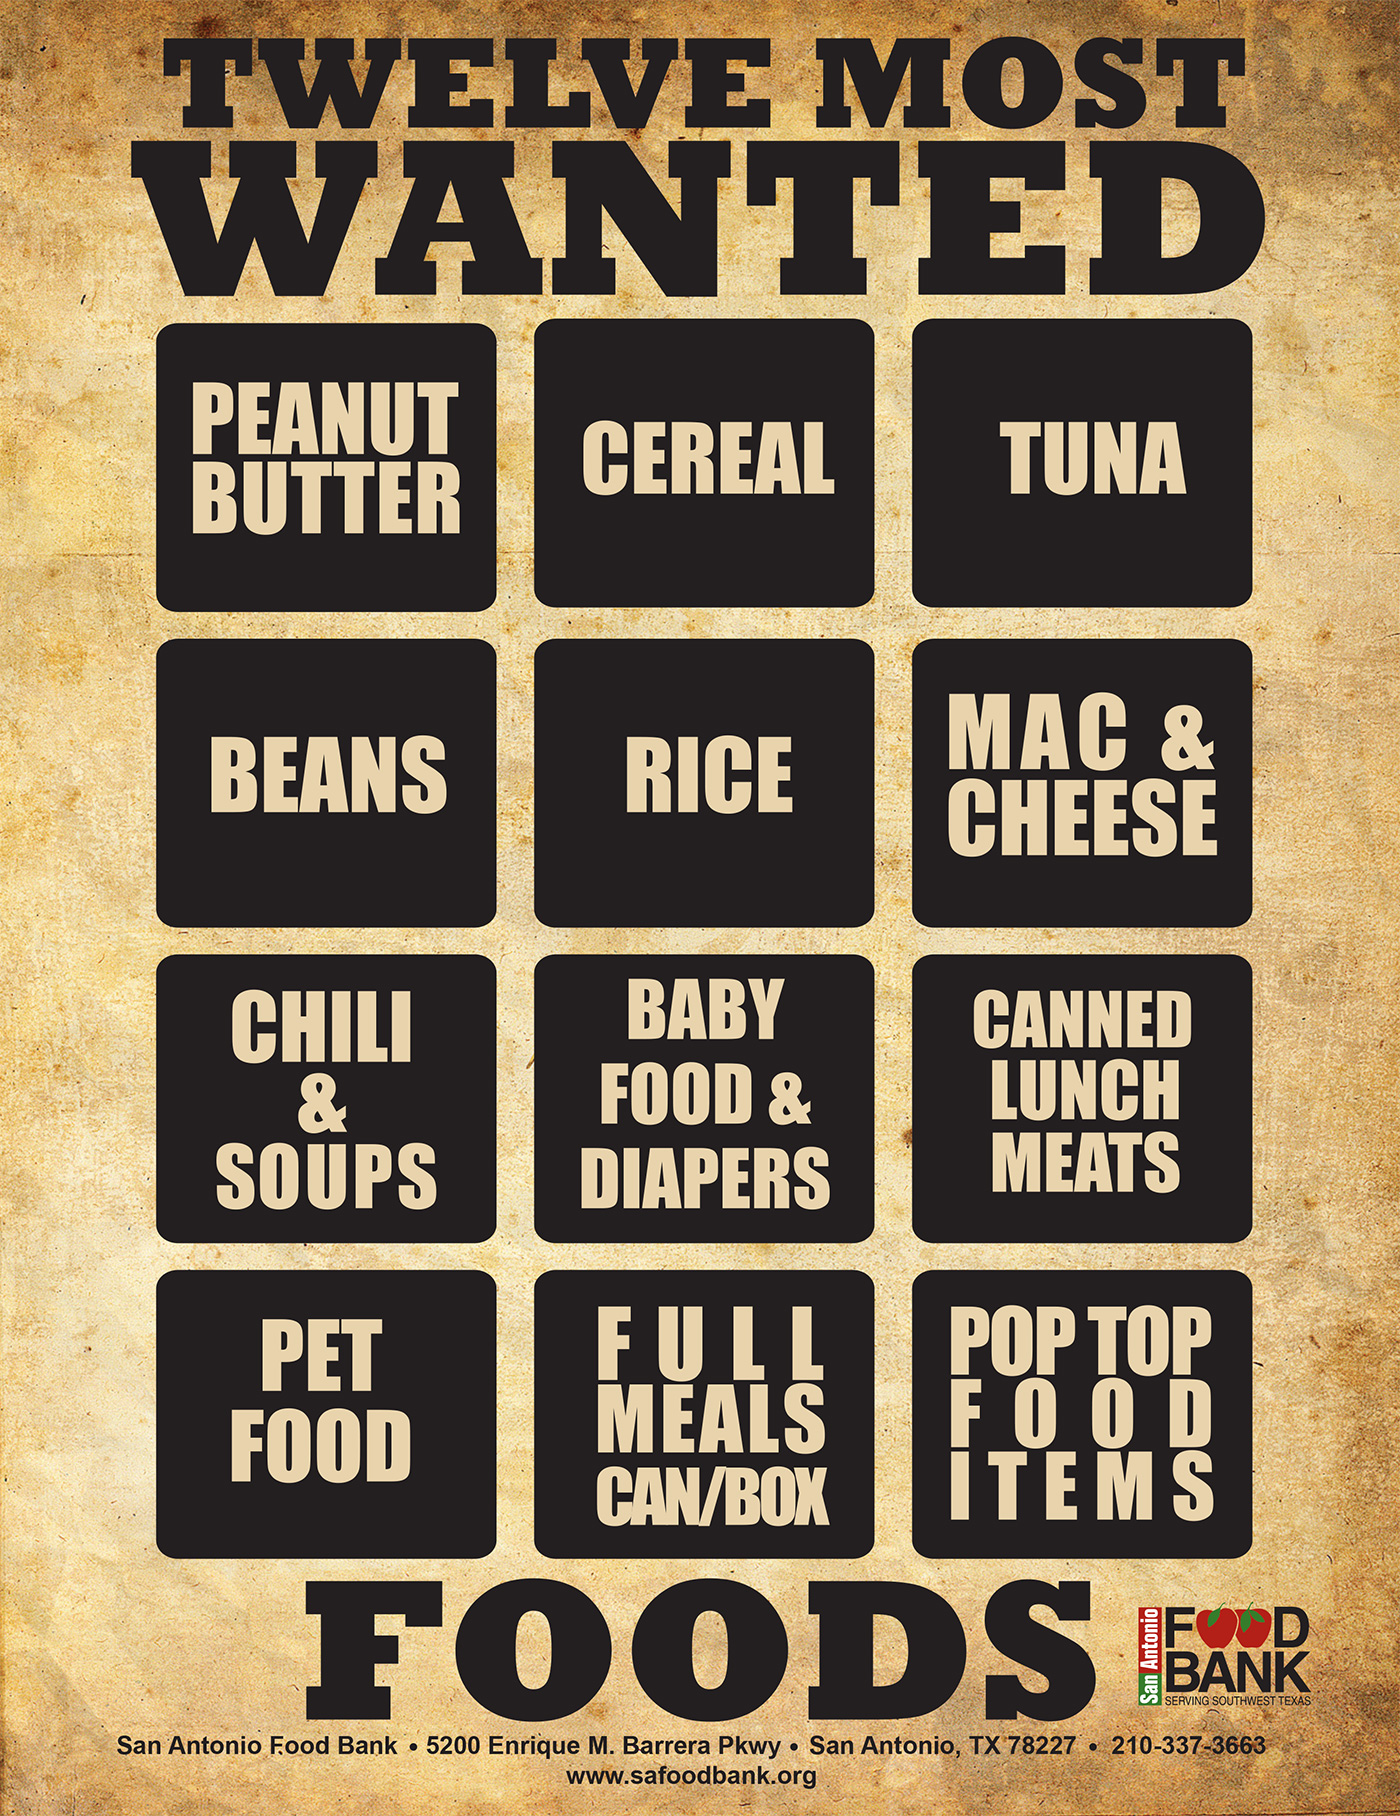 Most Wanted Foods